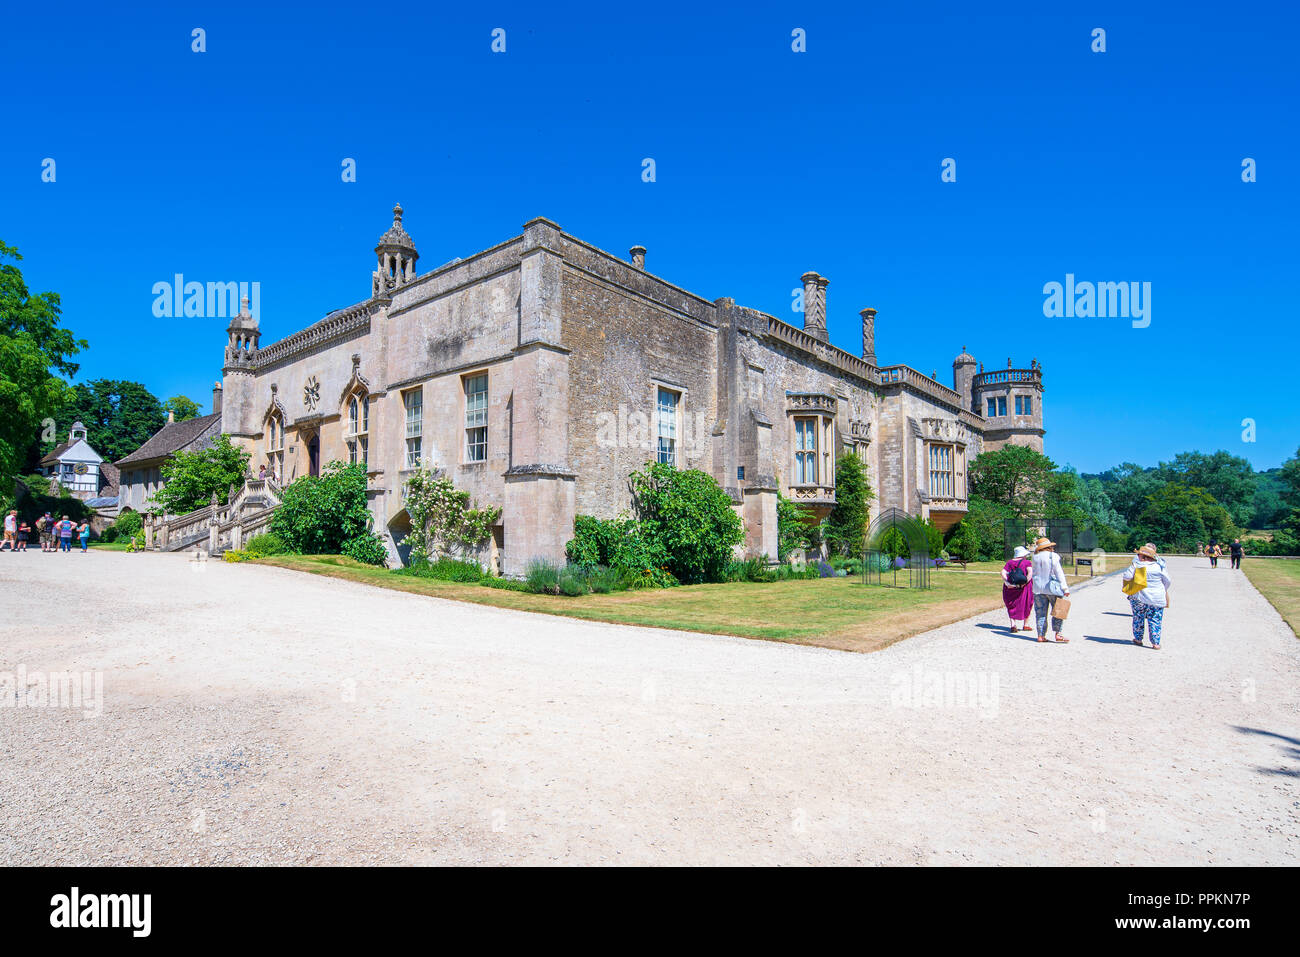 Lacock Abbey at Lacock, Wiltshire, England, United Kingdom, Europe Stock Photo